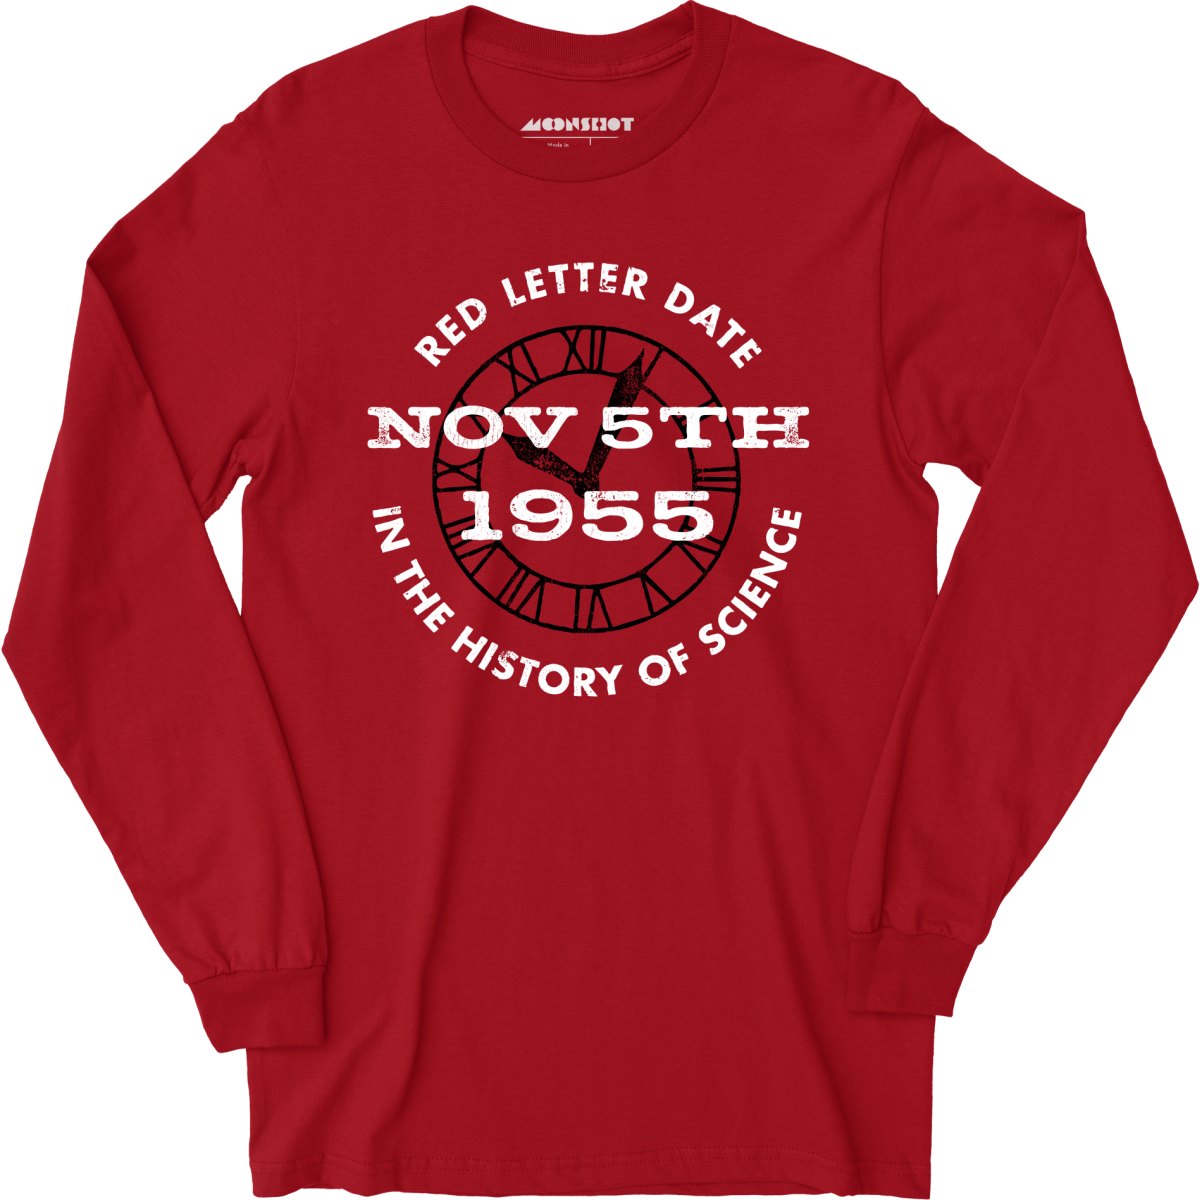 November 5th 1955 - Red Letter Date in the History of Science - Long Sleeve T-Shirt